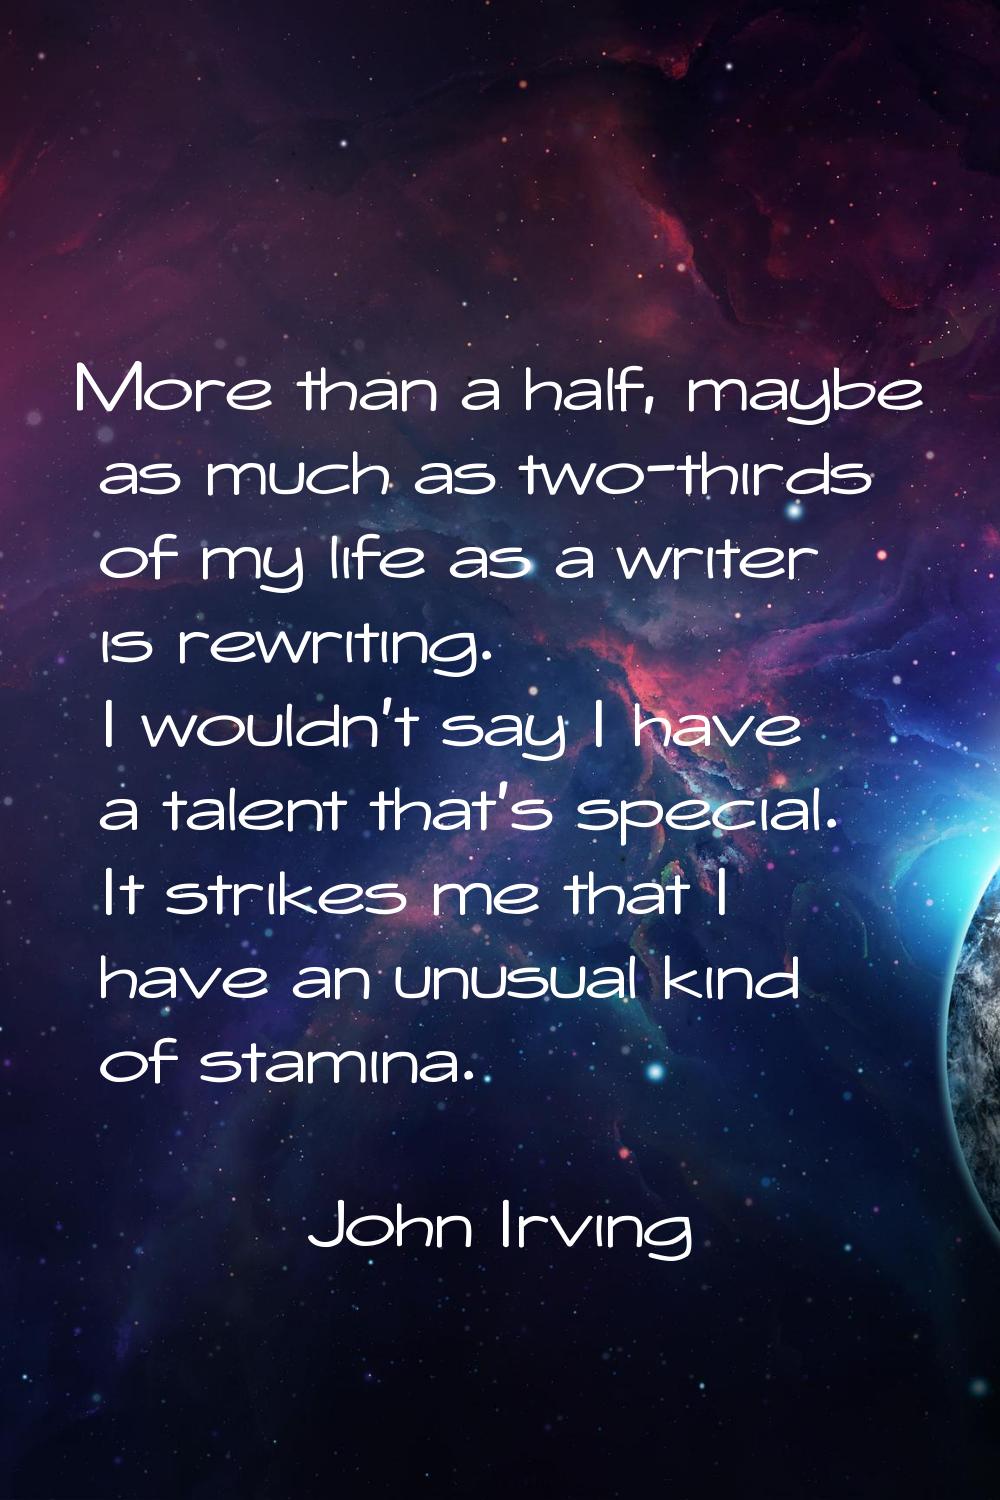 More than a half, maybe as much as two-thirds of my life as a writer is rewriting. I wouldn't say I